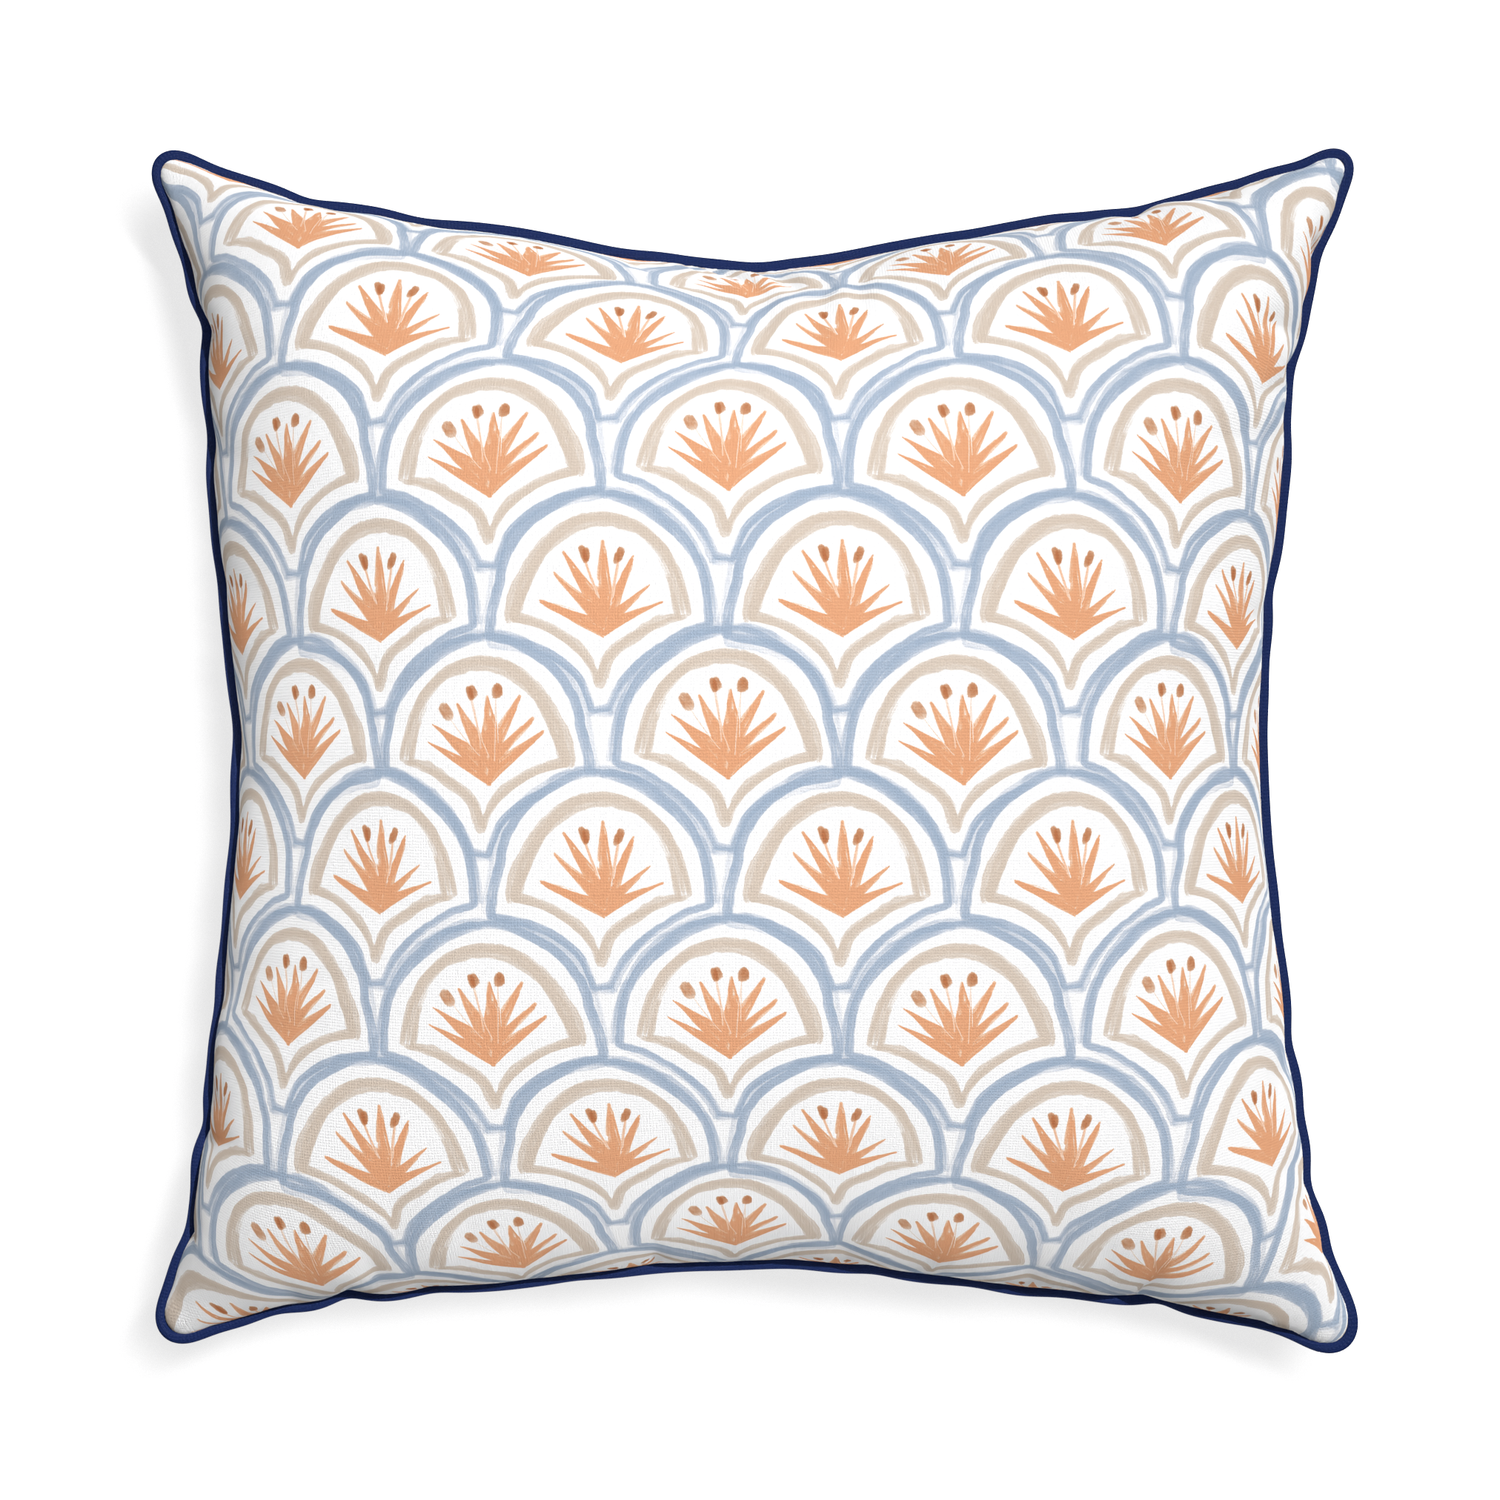 Euro-sham thatcher apricot custom art deco palm patternpillow with midnight piping on white background